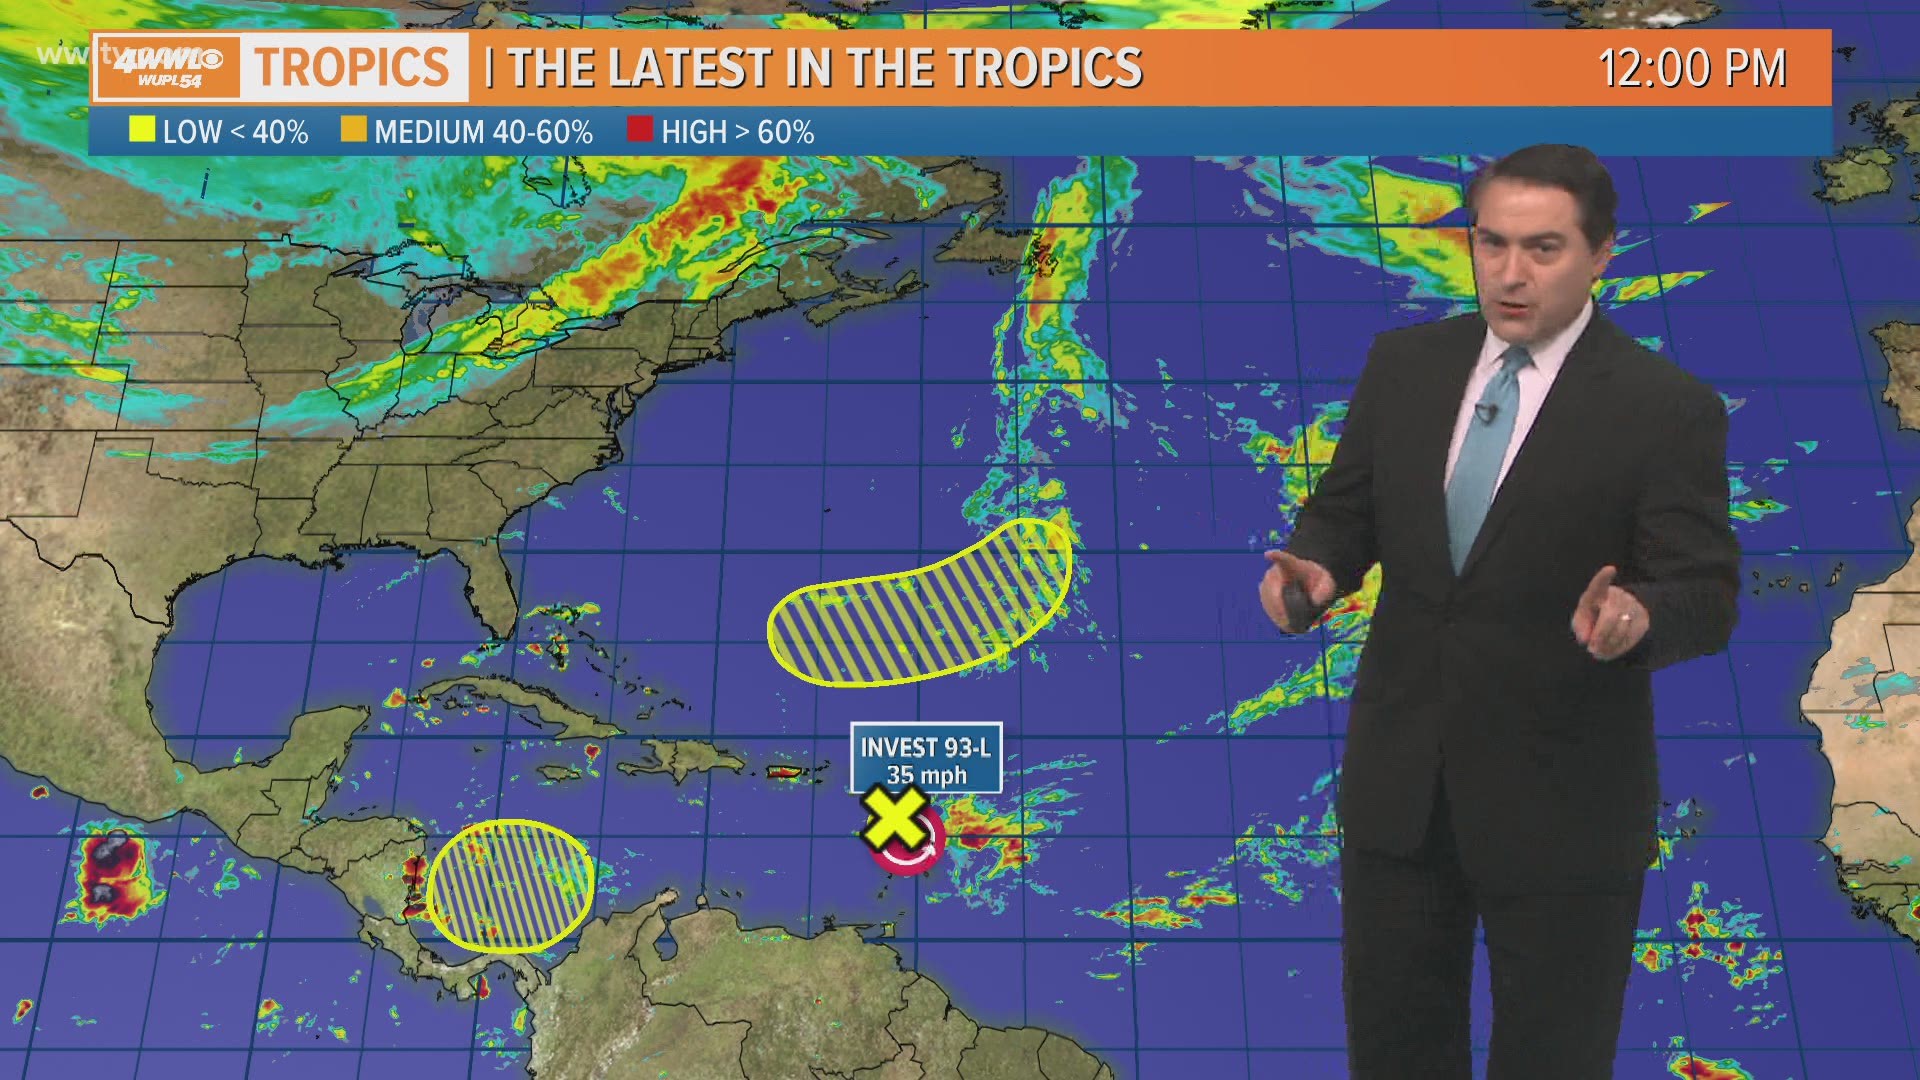 There are currently three possible systems in the Atlantic, but Meteorologist Dave Nussbaum says none of them appears to be a threat to southeast Louisiana.